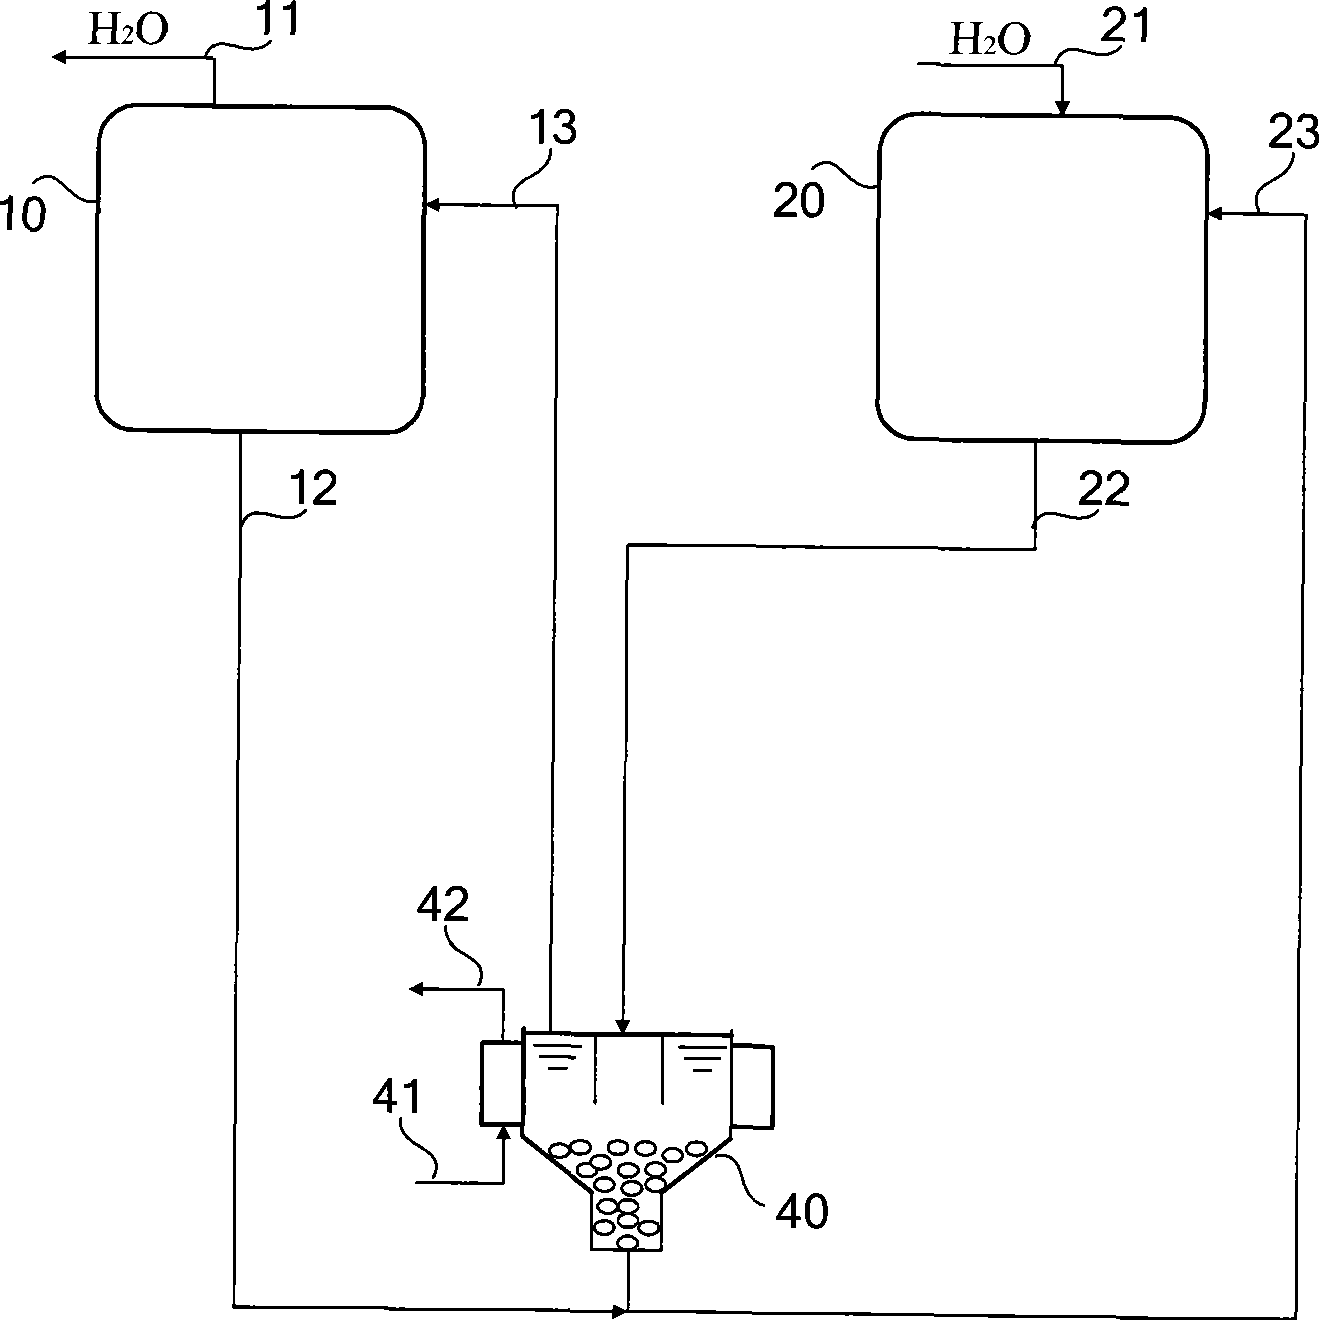 Absorbent solution circulating system and method